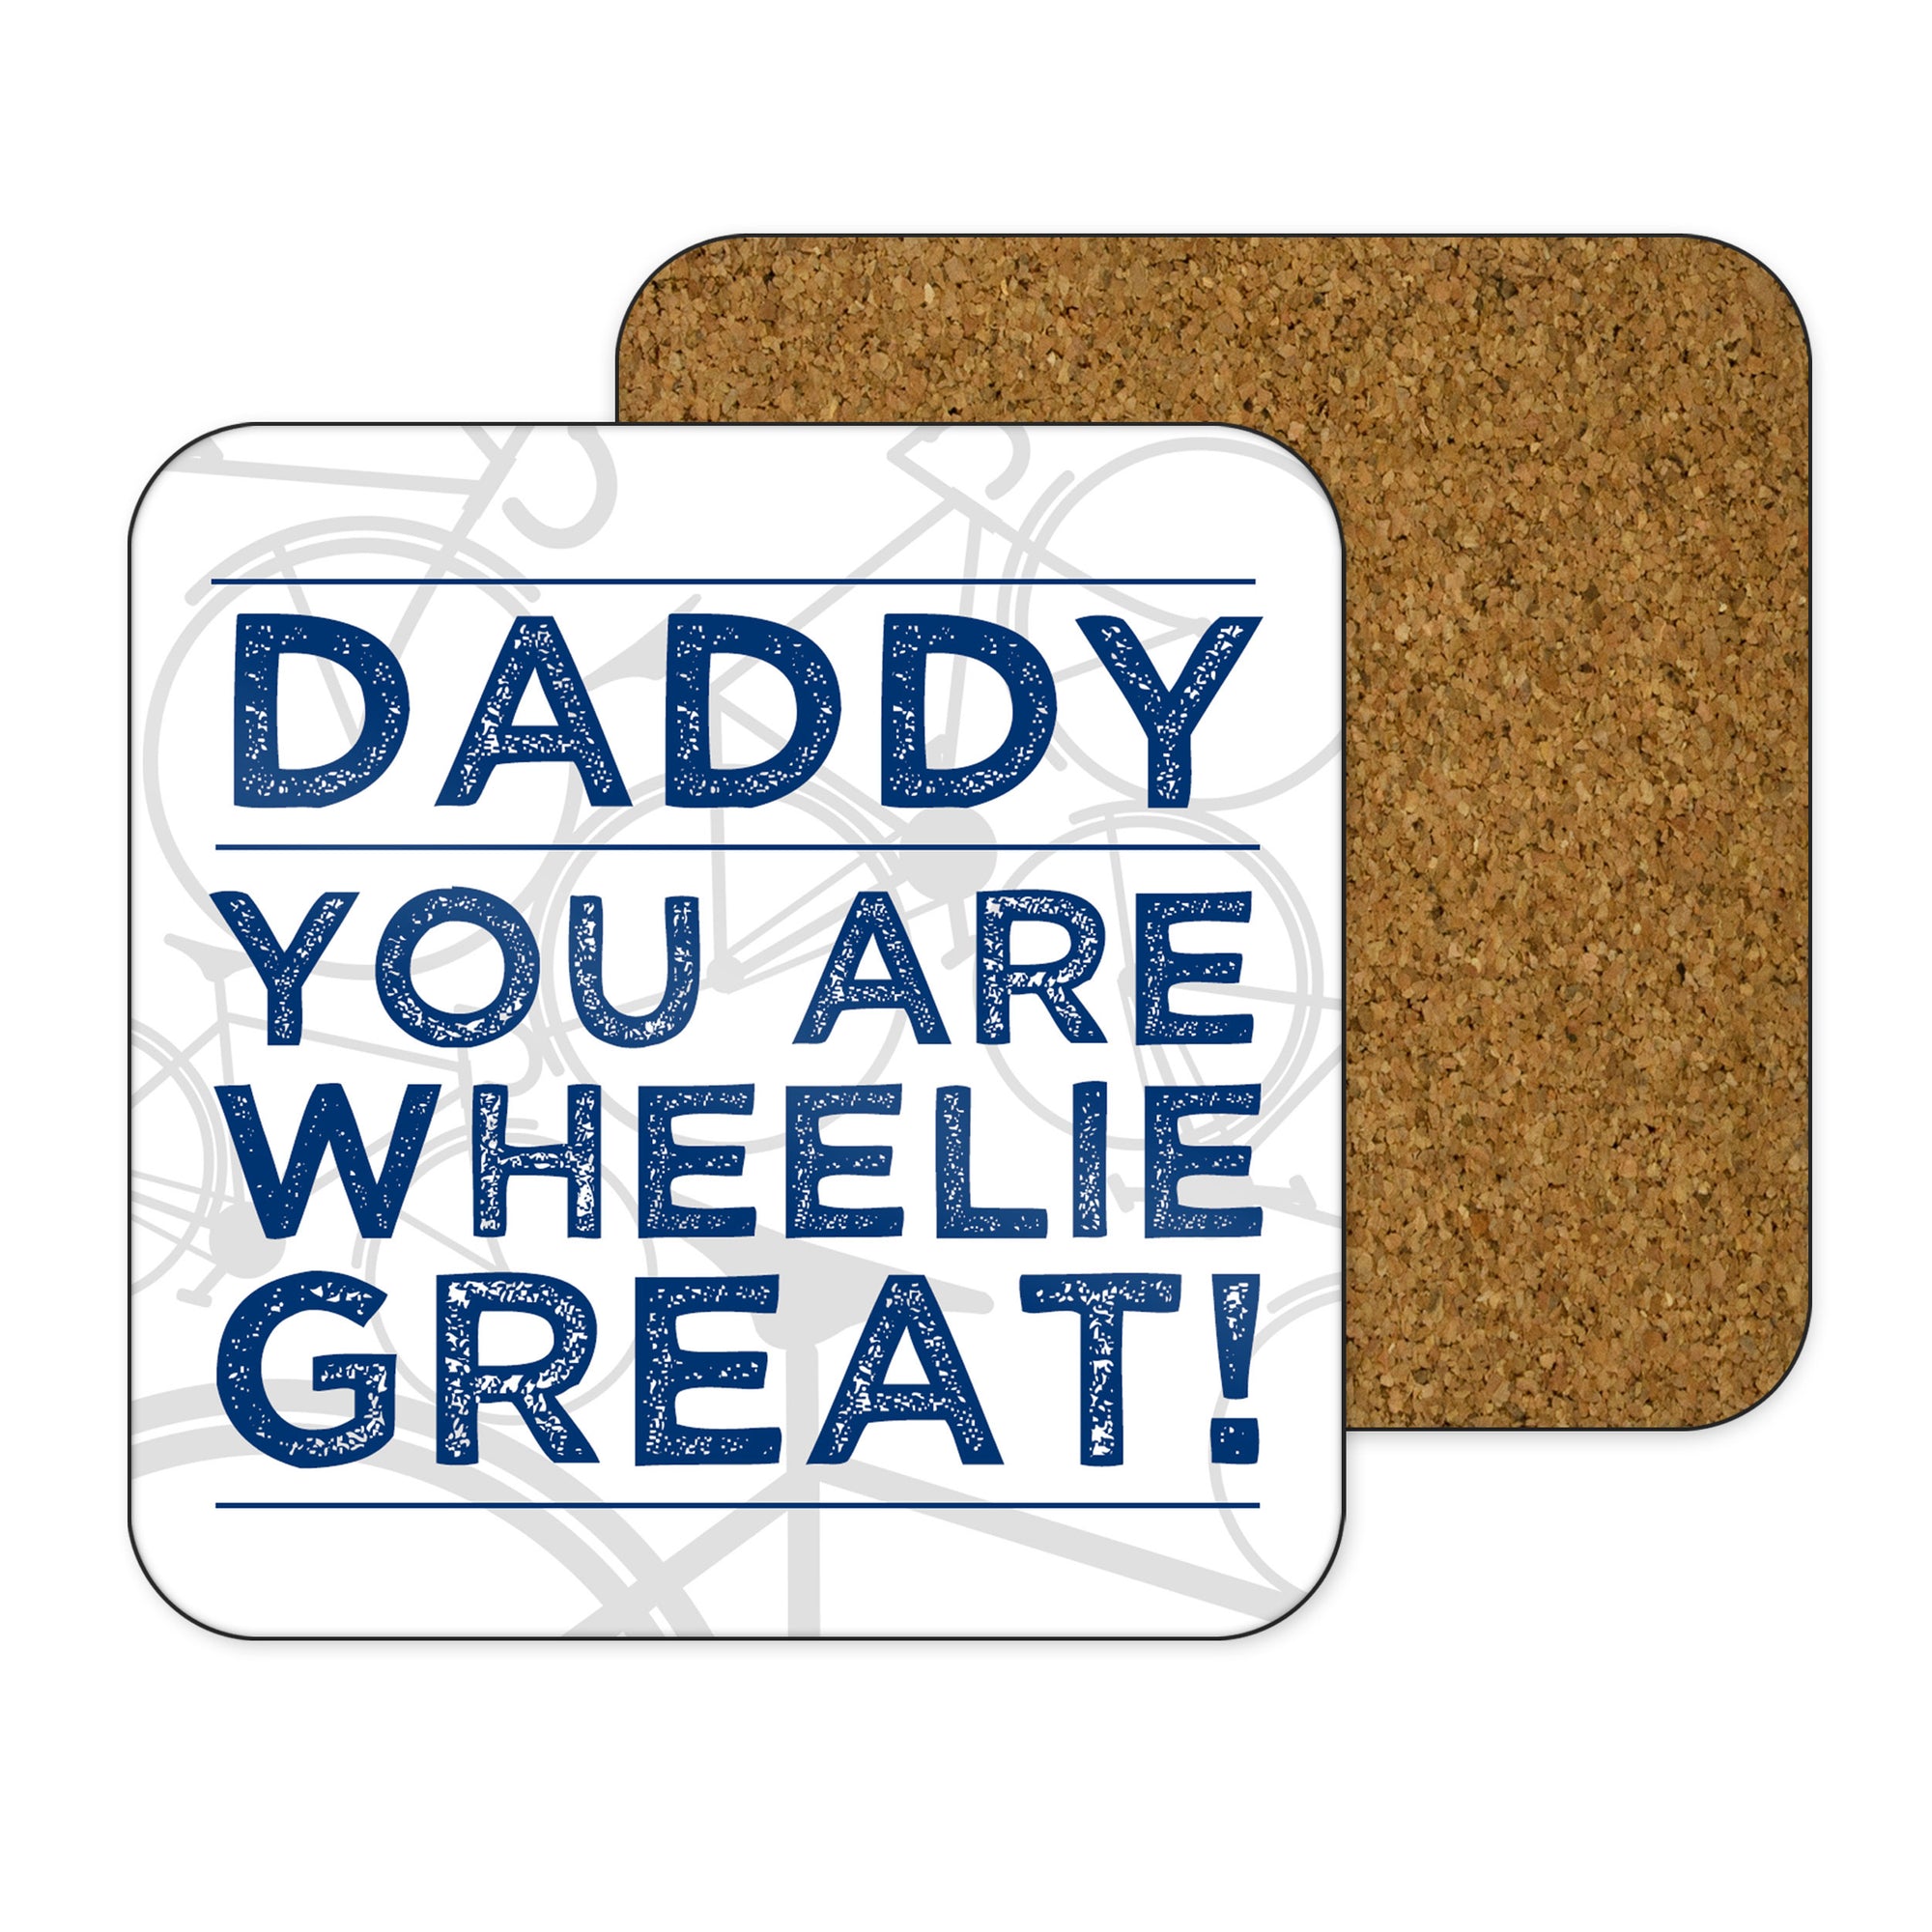 Daddy You Are Wheelie Great Personalised Cycling Coaster